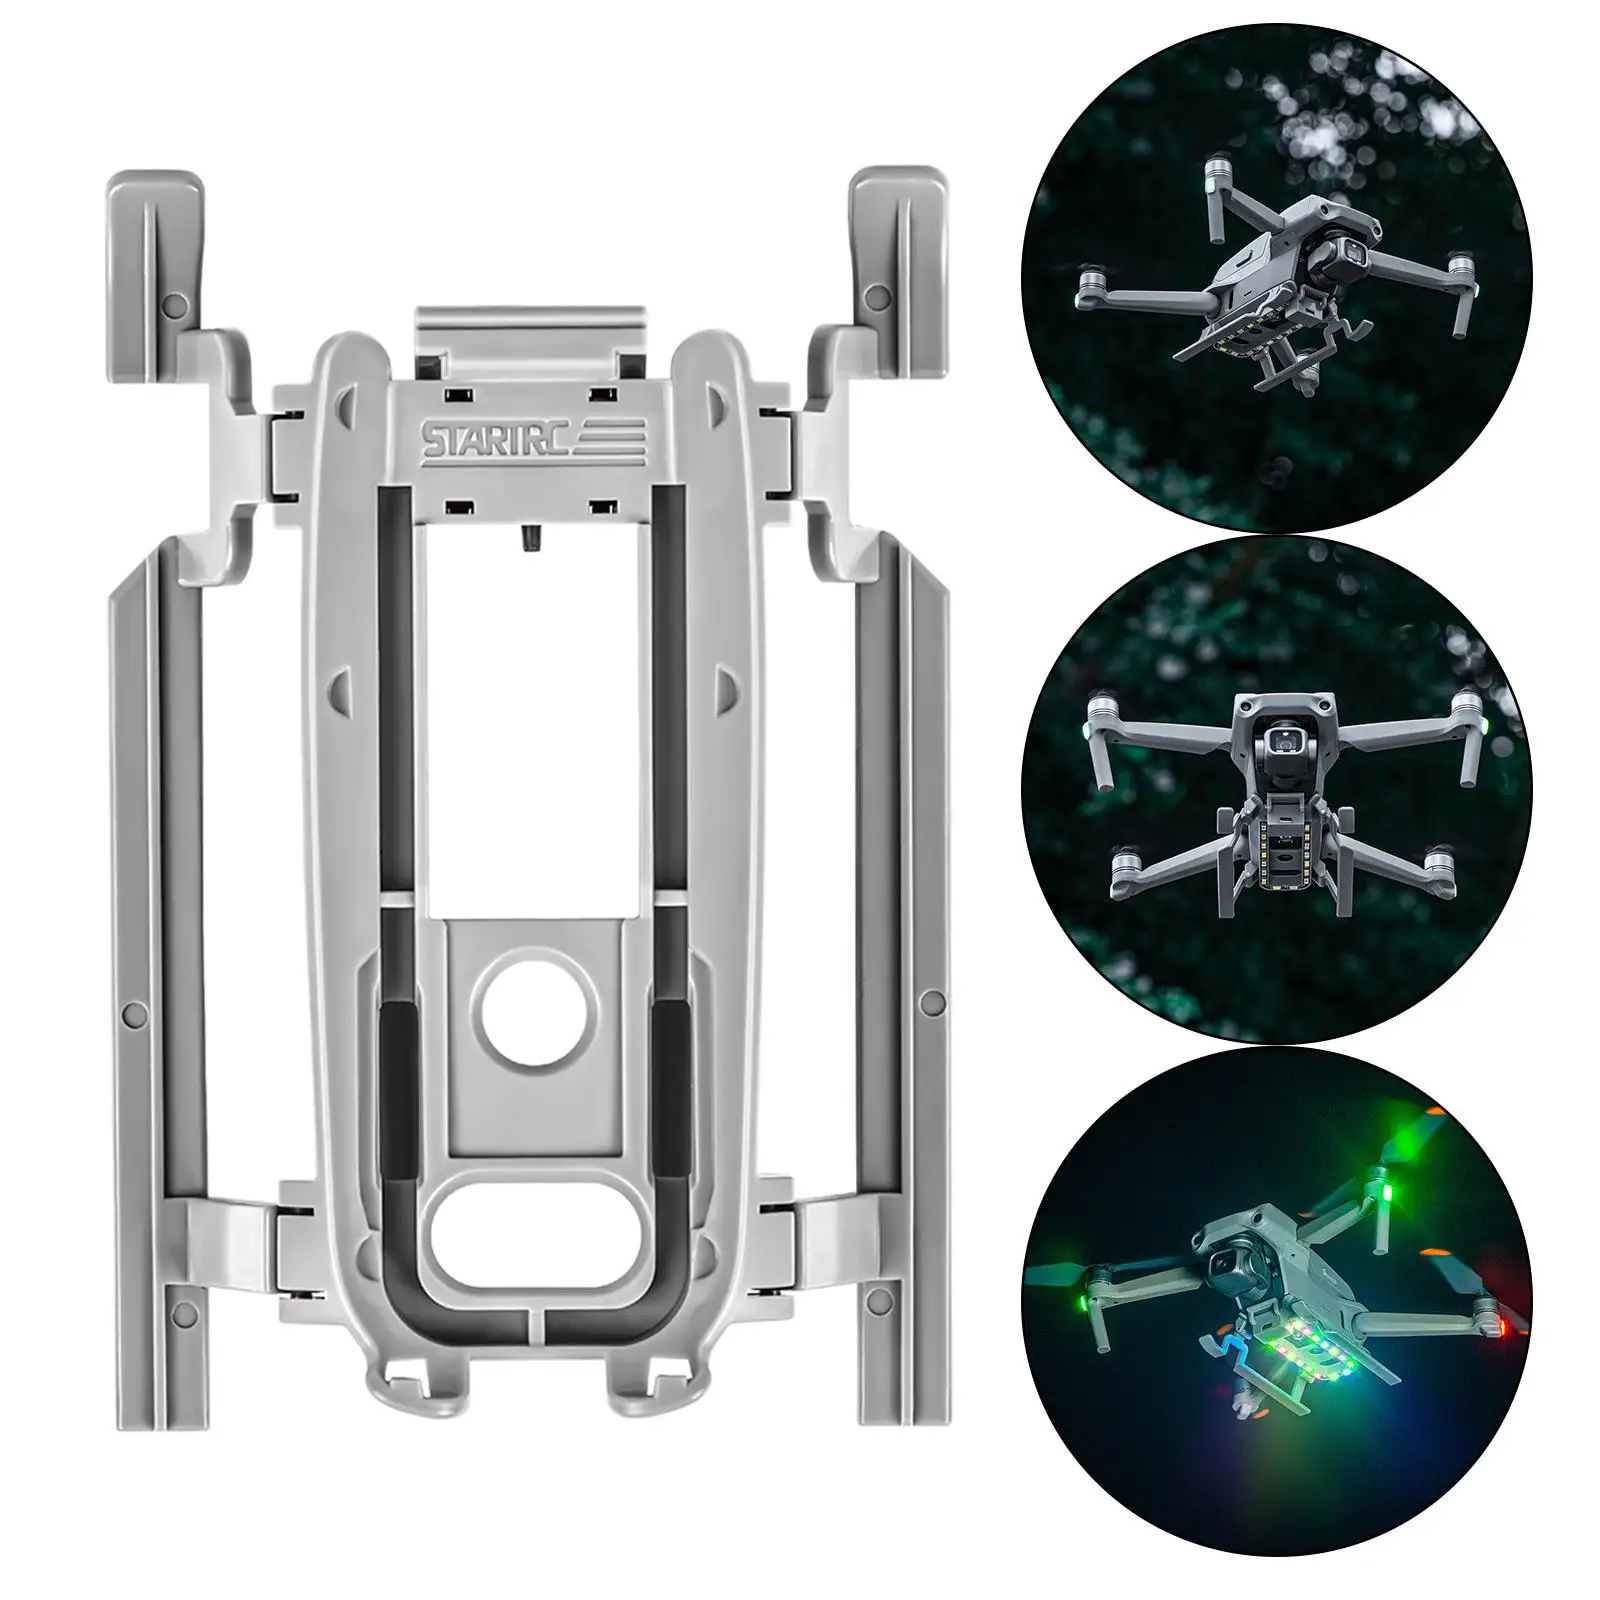 LED Light Landing Gear Extensions Skid Folding for DJI Air 2S for DJI Mavic Air 2 Drone Accessories Other RC Model Vehicle Parts